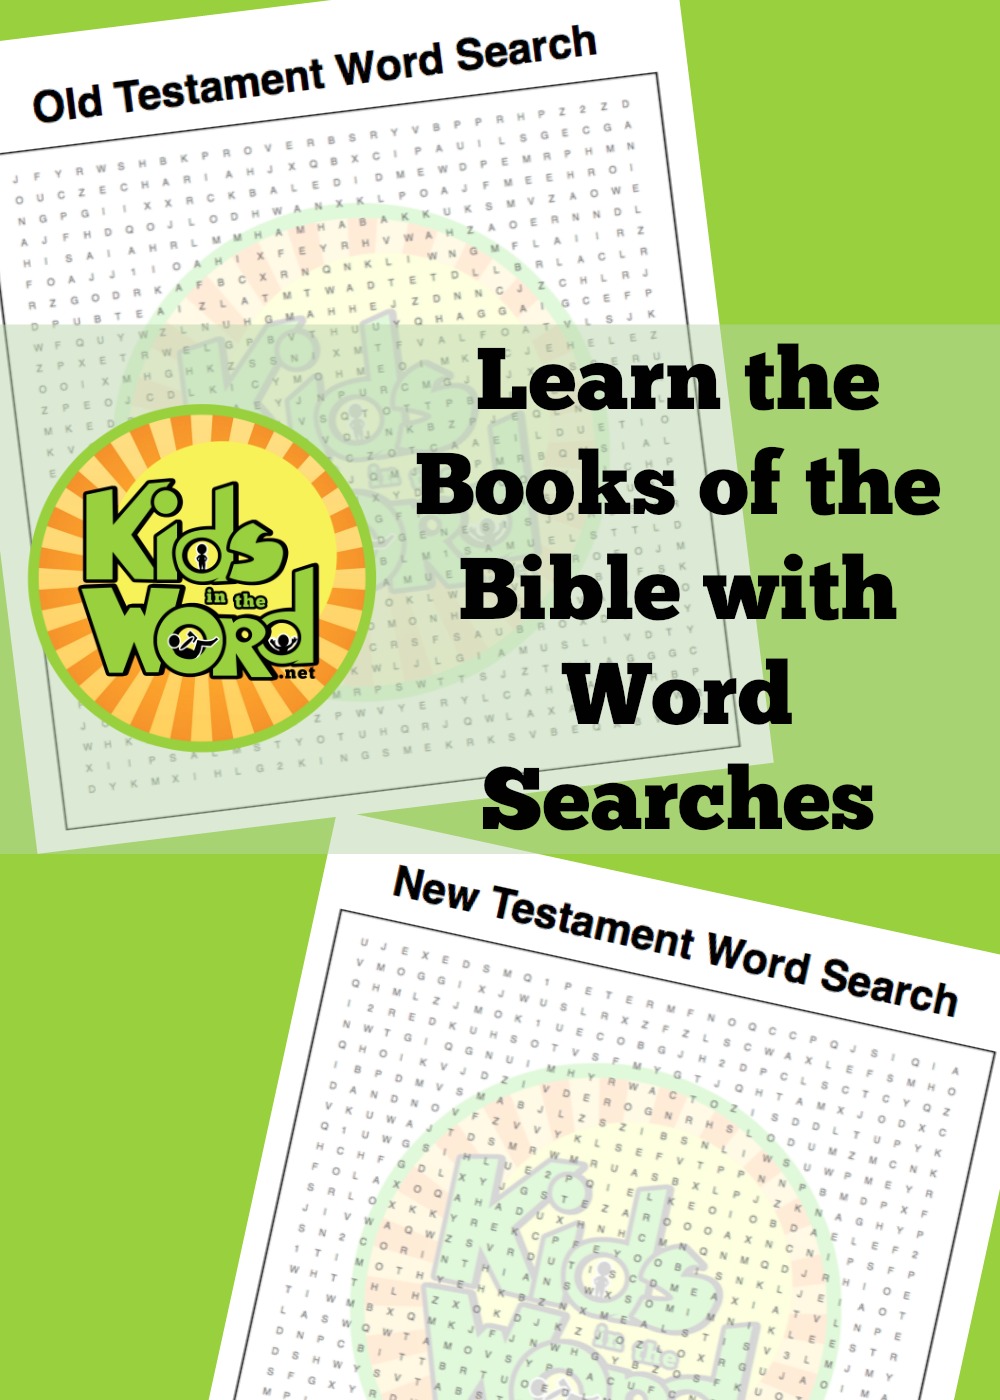 Help your kids become familiar with the names of the books of the Bible using these word searches at KidsintheWord.net